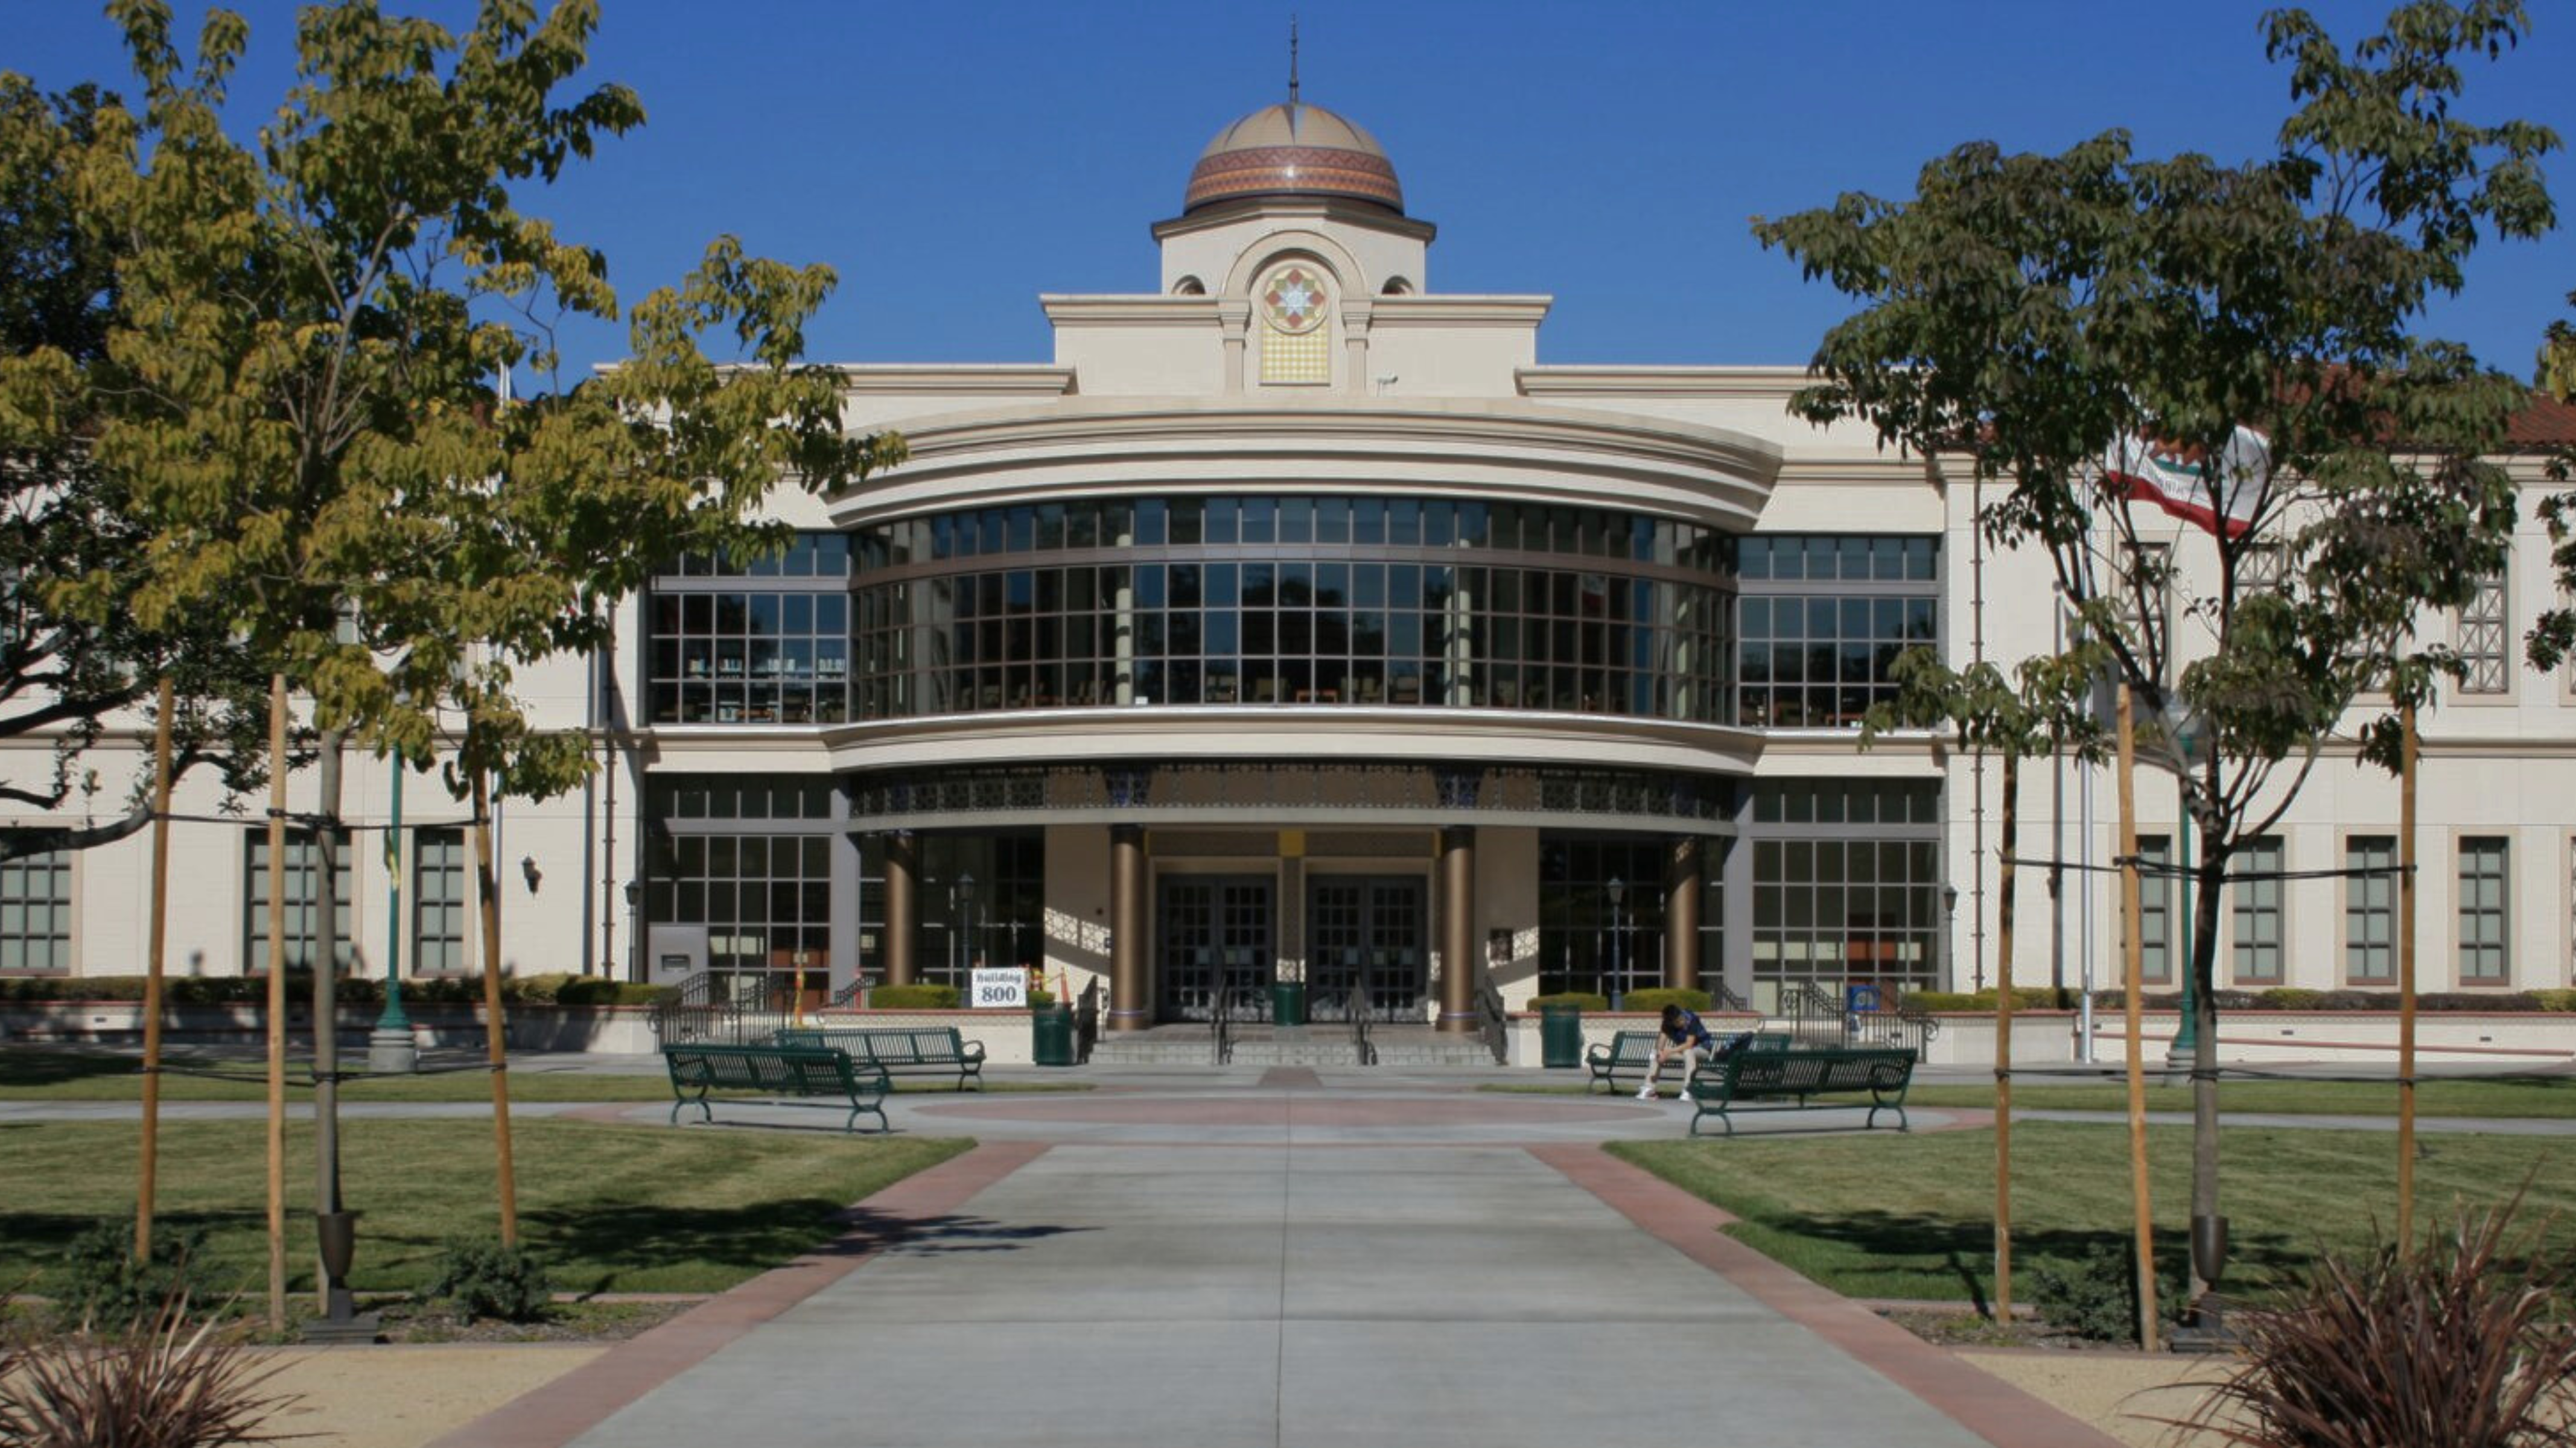 EON REALITY BRINGS SPATIAL AI TO FULLERTON COLLEGE IN CALIFORNIA